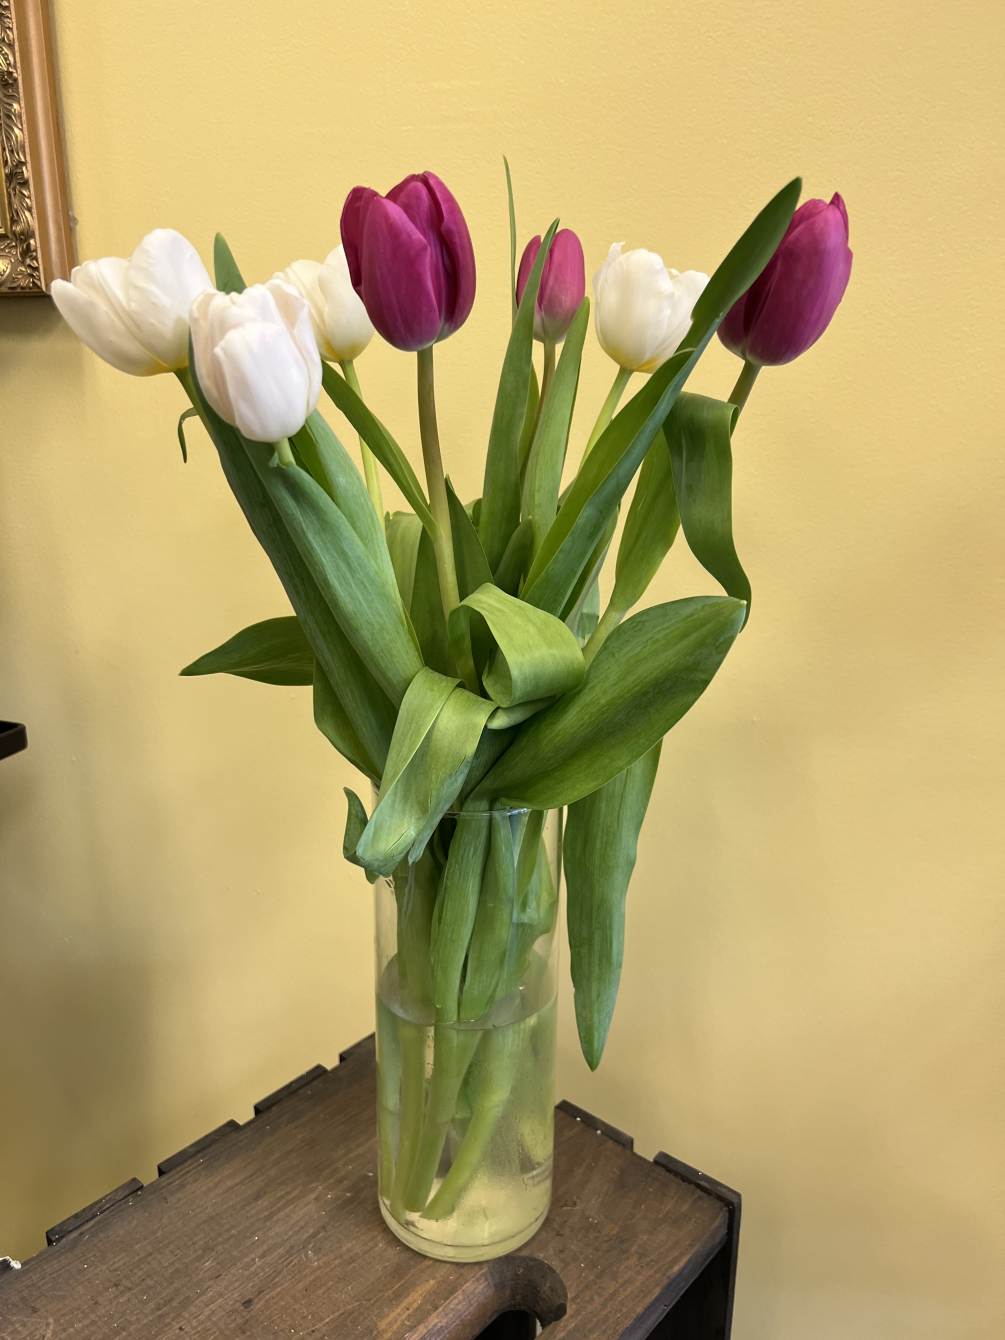 This simple spring arrangement of tulips will brighten any day!
**Call for available